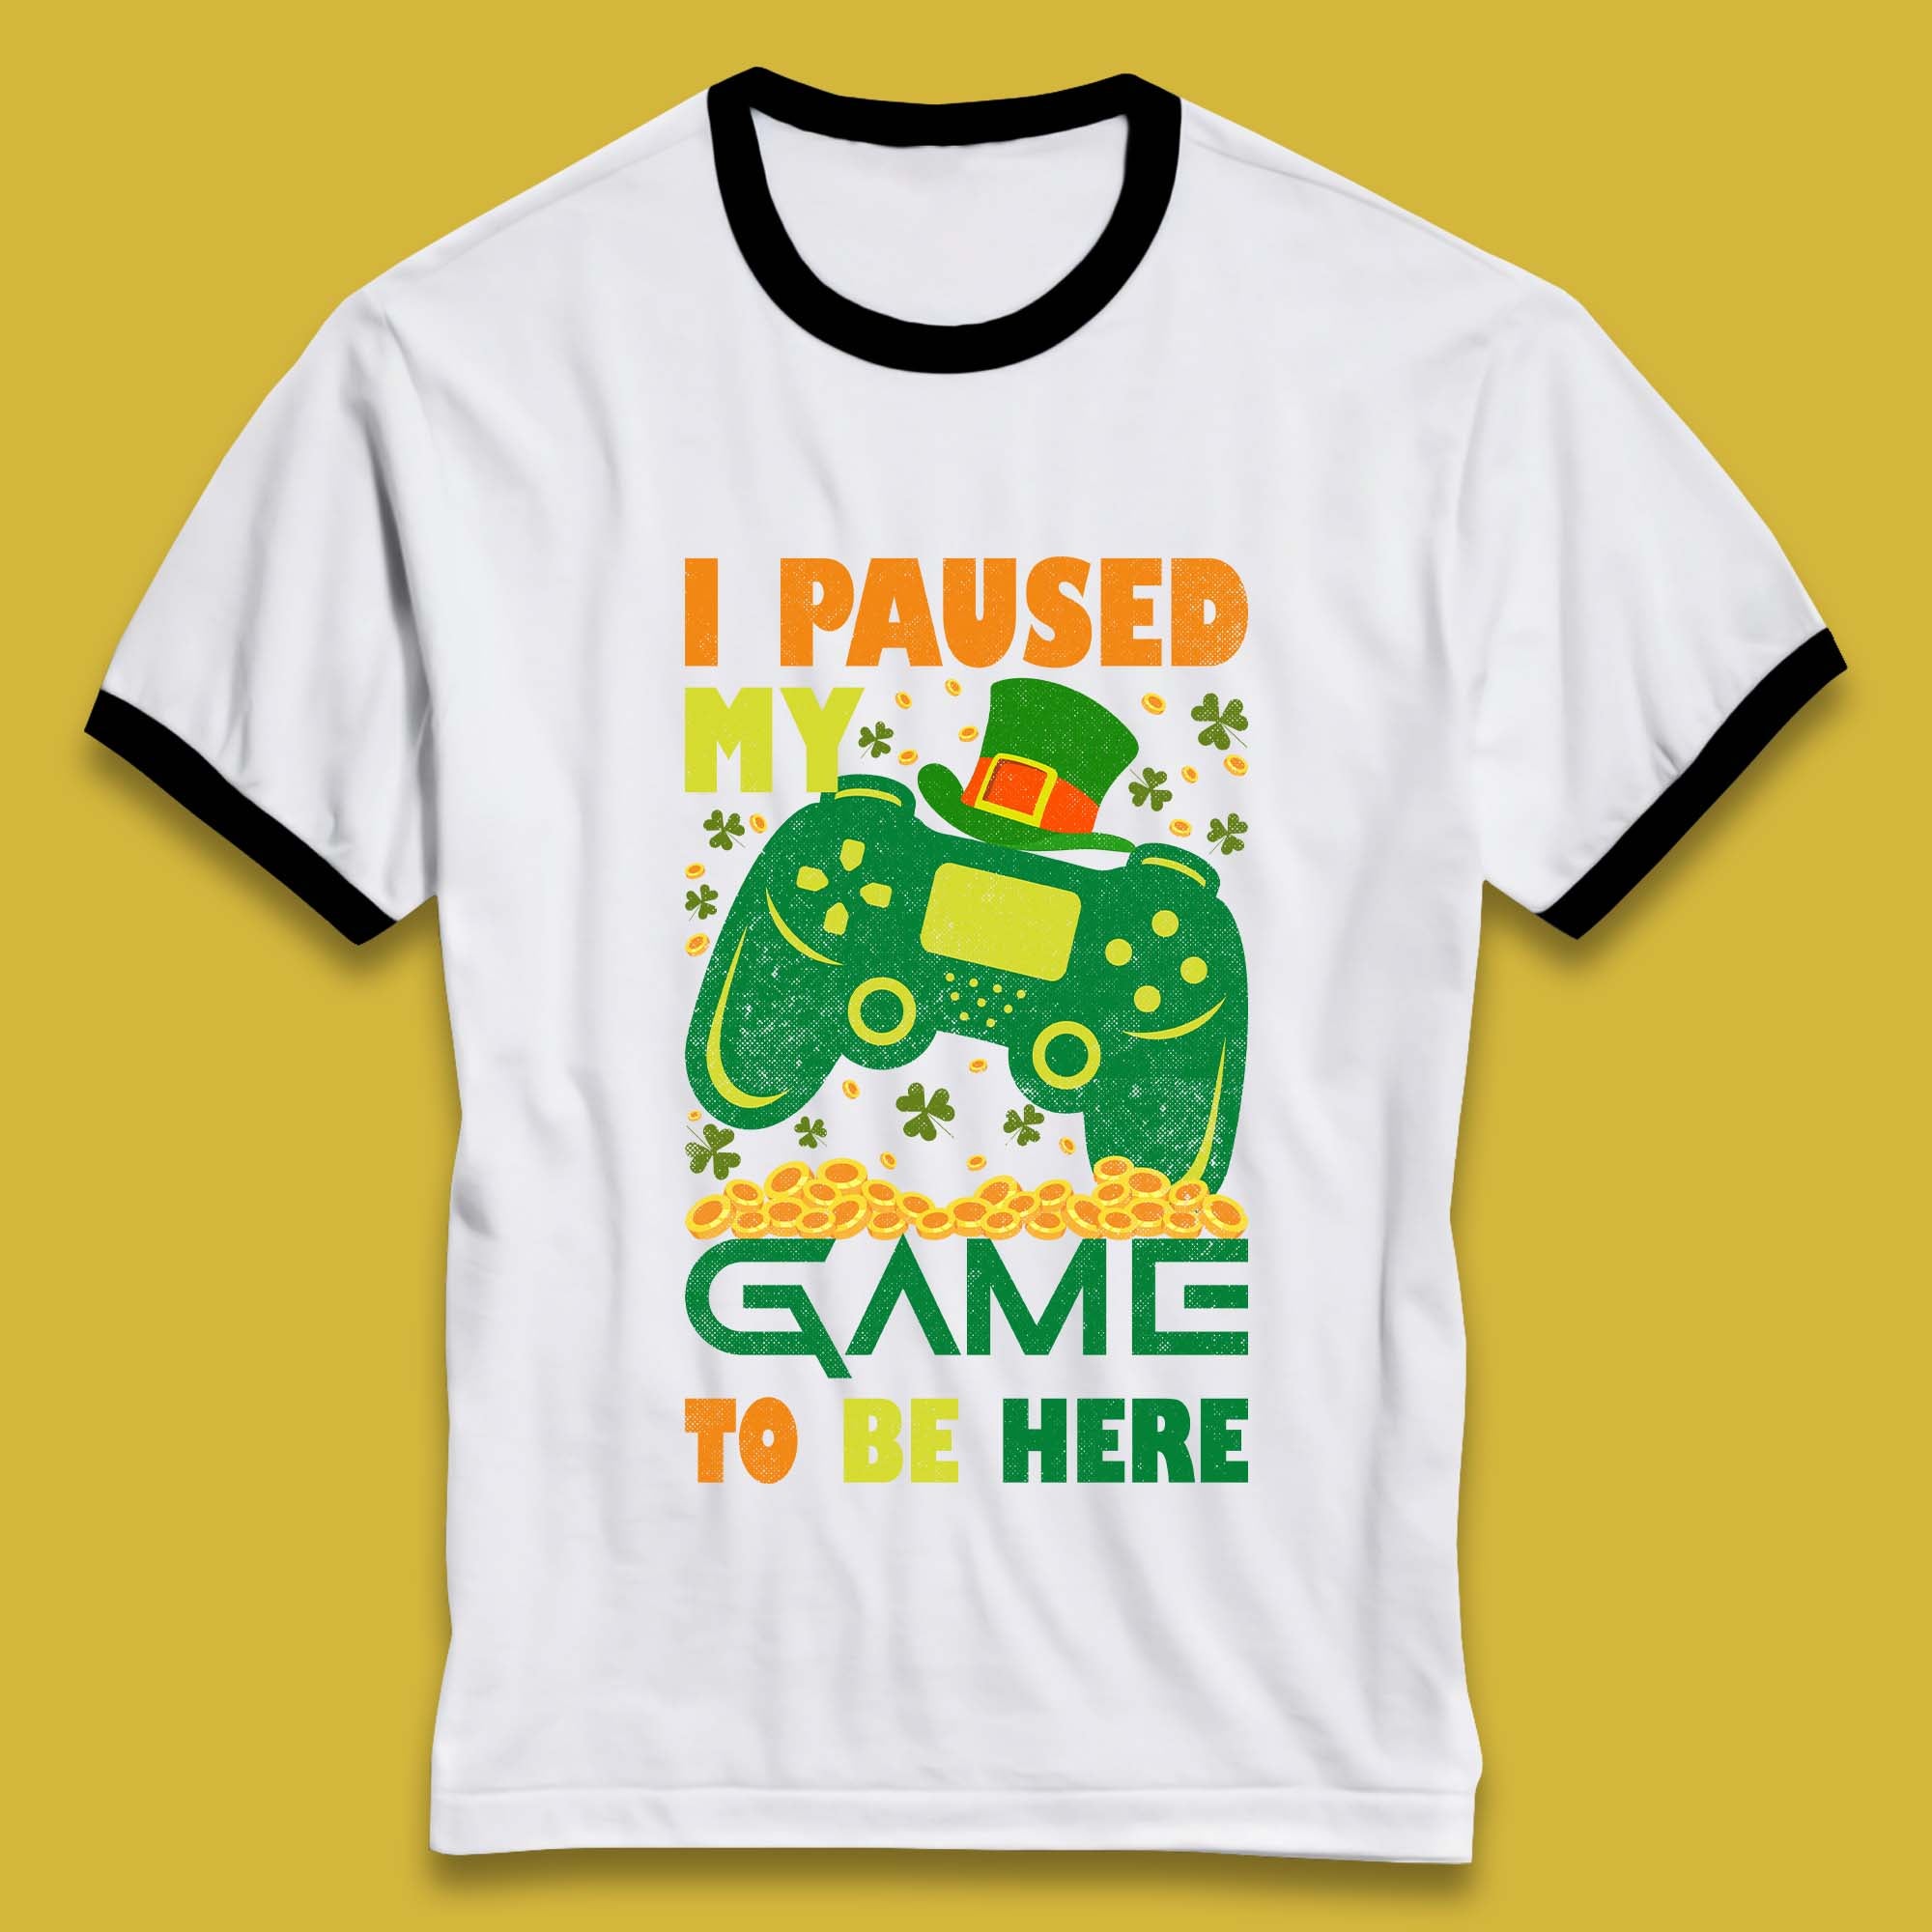 I Paused My Game To Be Here Ringer T-Shirt